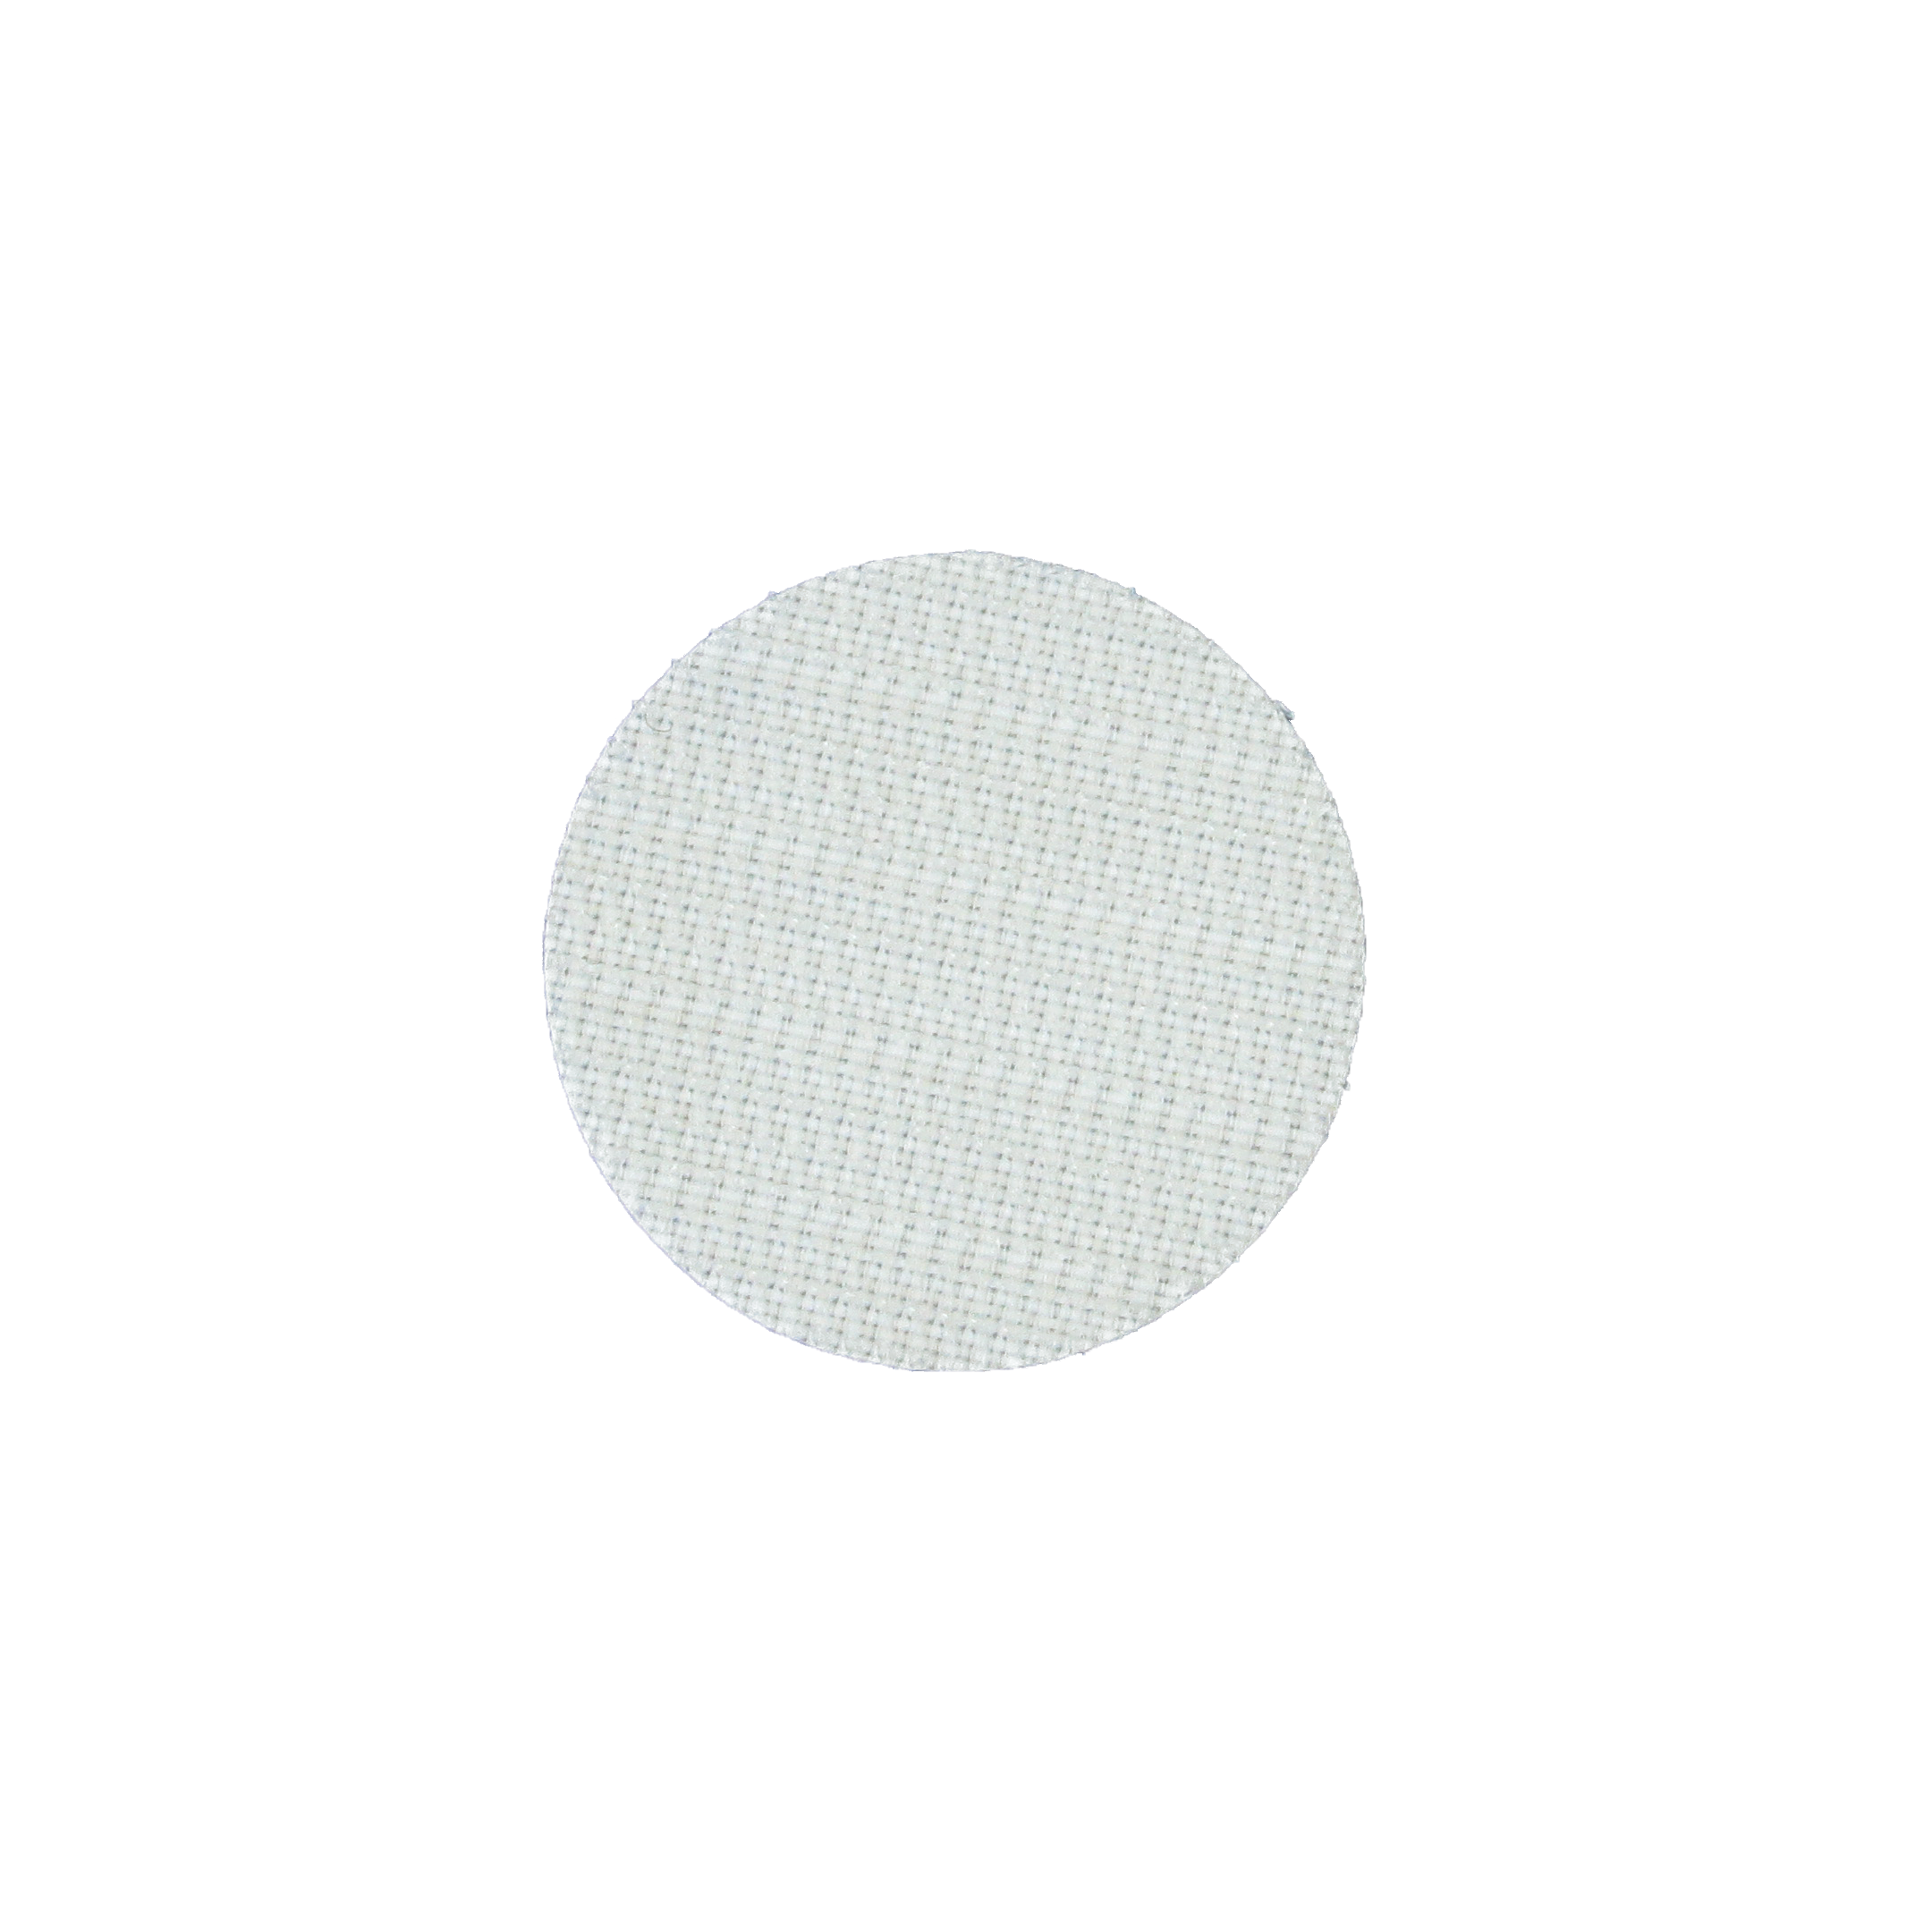 1/4 WHITE VELCRO® BRAND VELCOIN® HOOK ADHESIVE BACKED - COINS, CIRCLES, &  DOTS